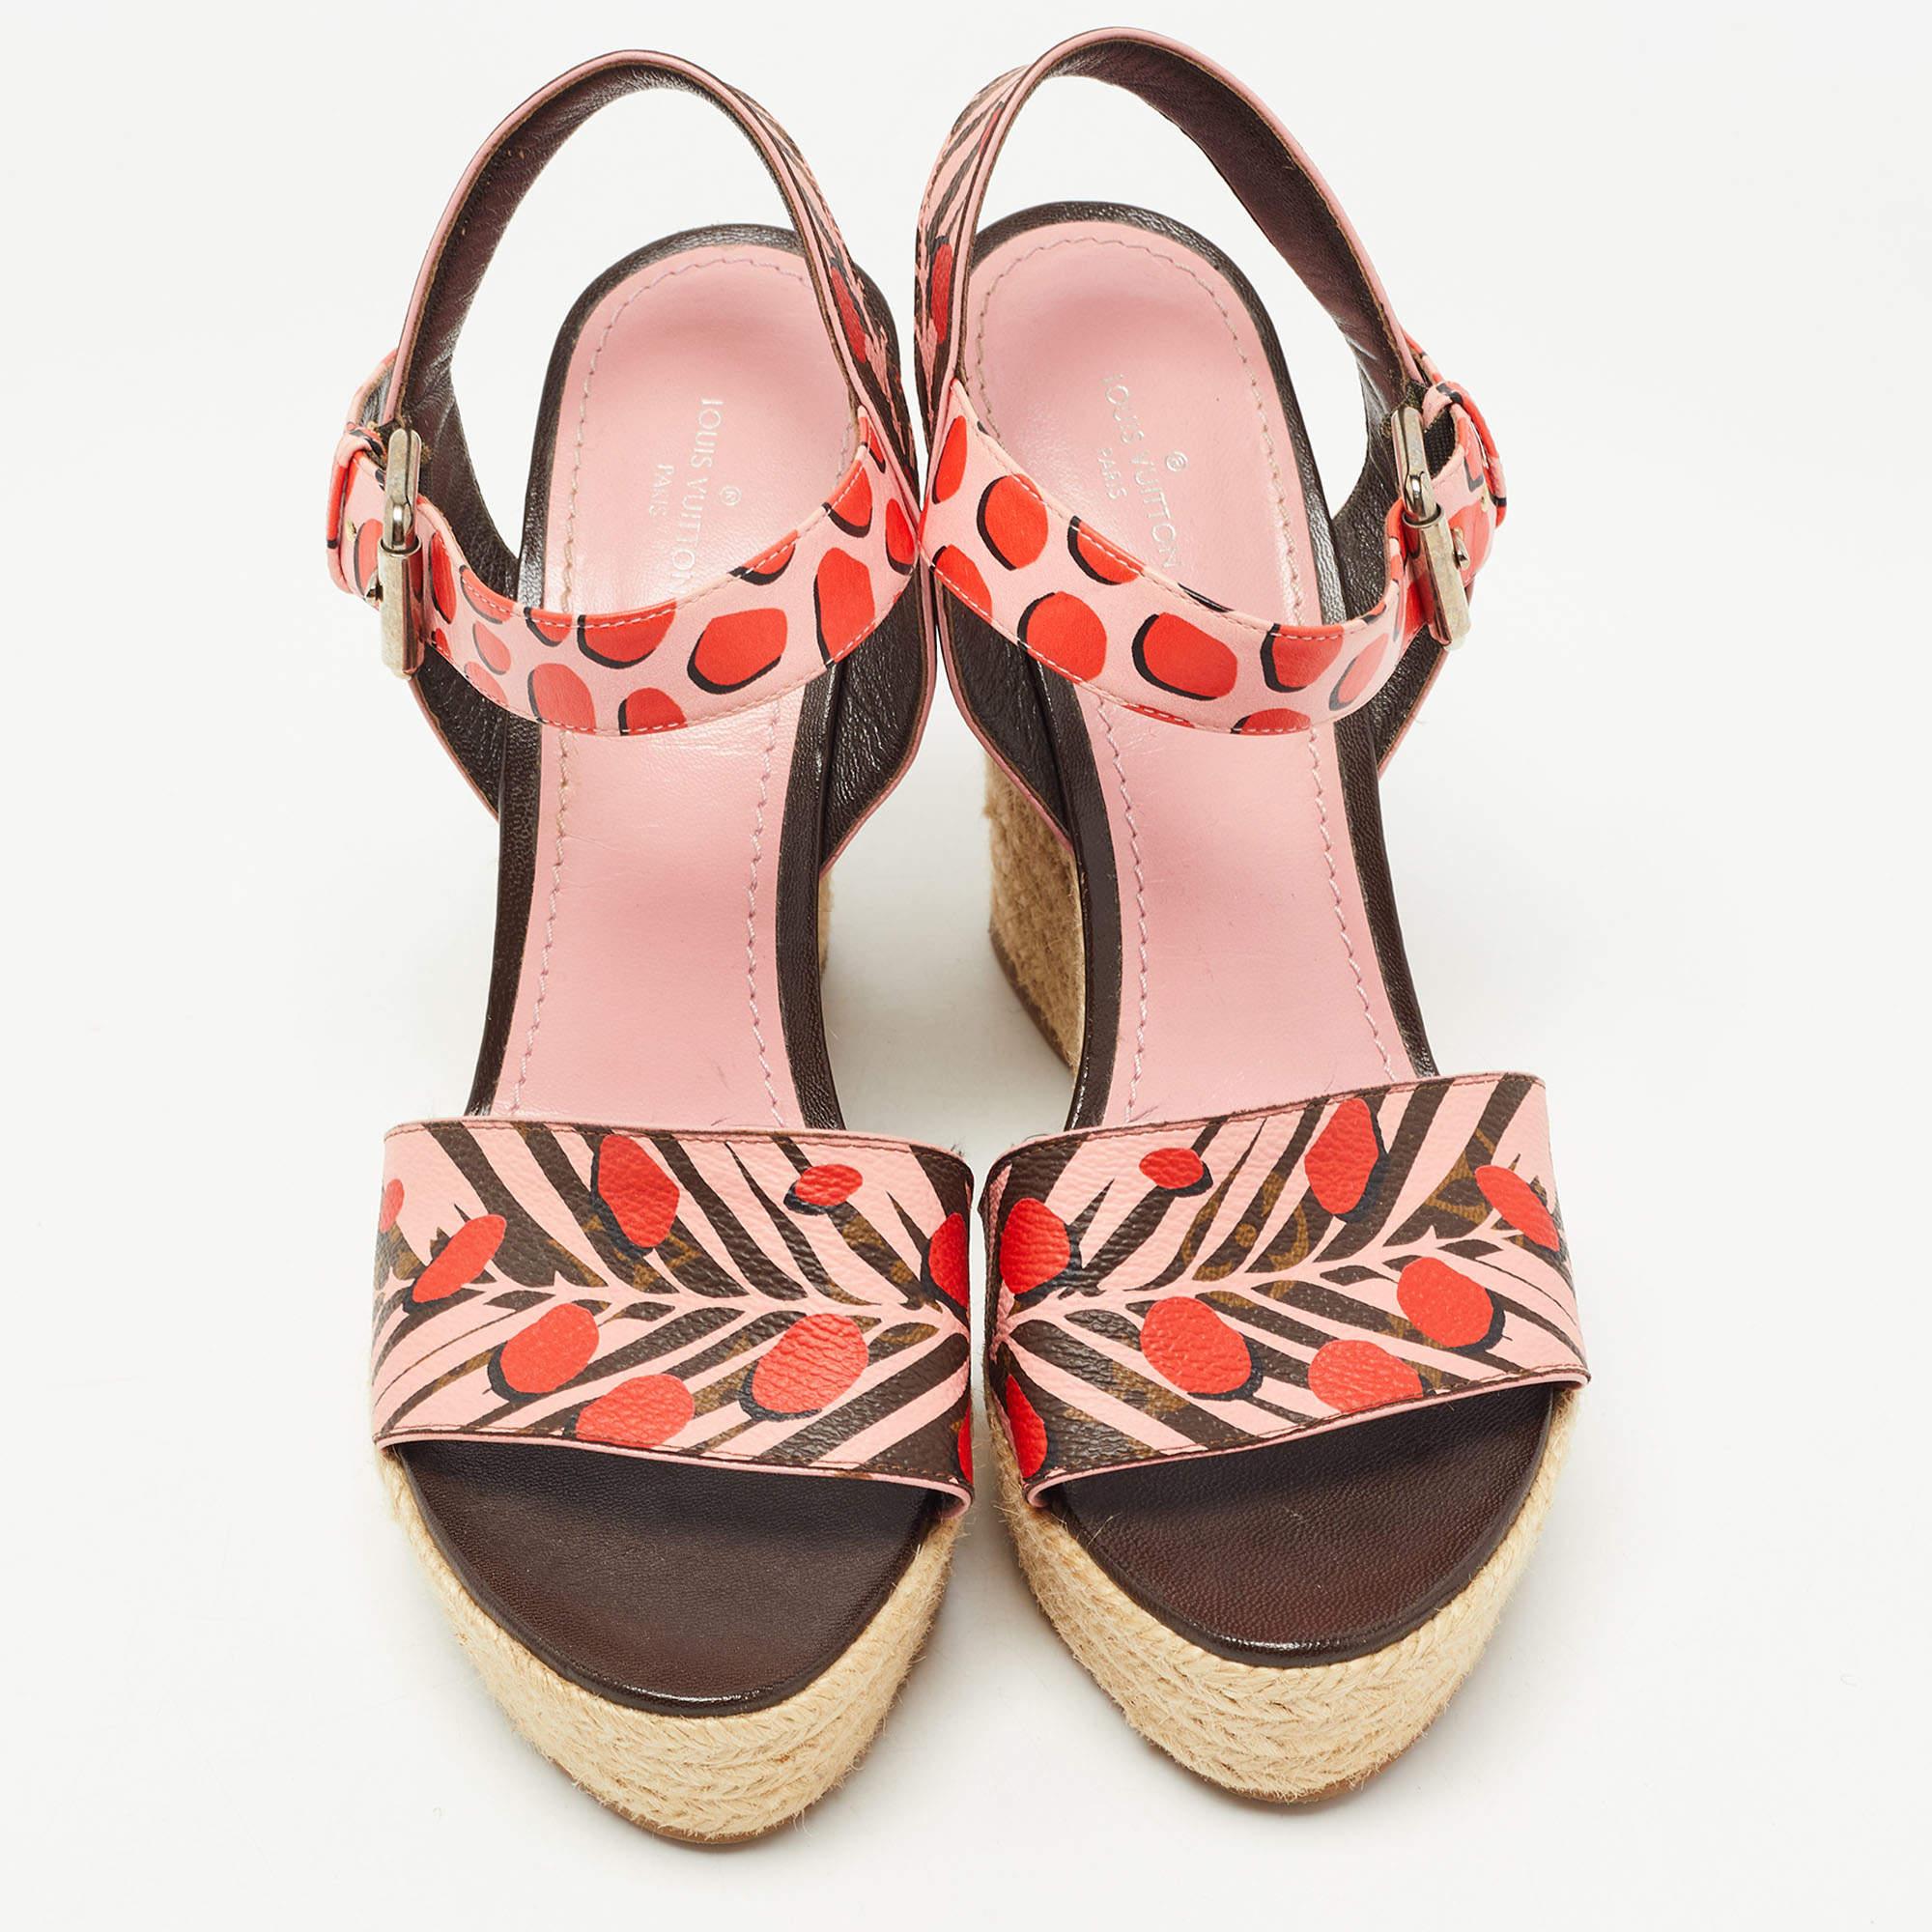 Lend an elegant finish to your look of the day with these Louis Vuitton wedge sandals. They feature open toes, ankle strap fastening, and espadrille wedge heels.

